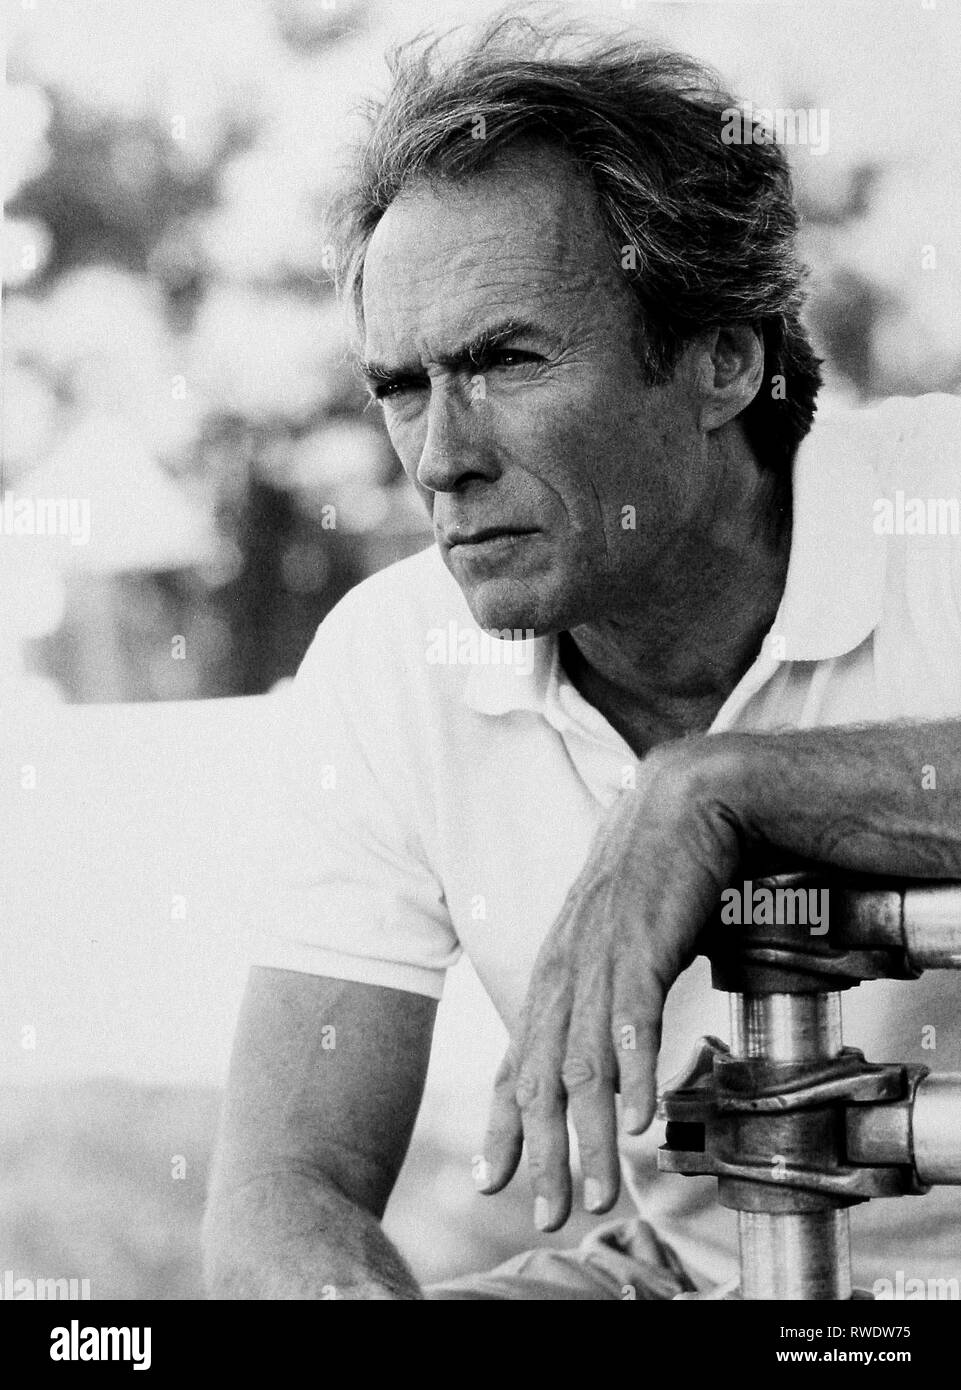 CLINT EASTWOOD, storie incredibili:, 1985 Foto Stock